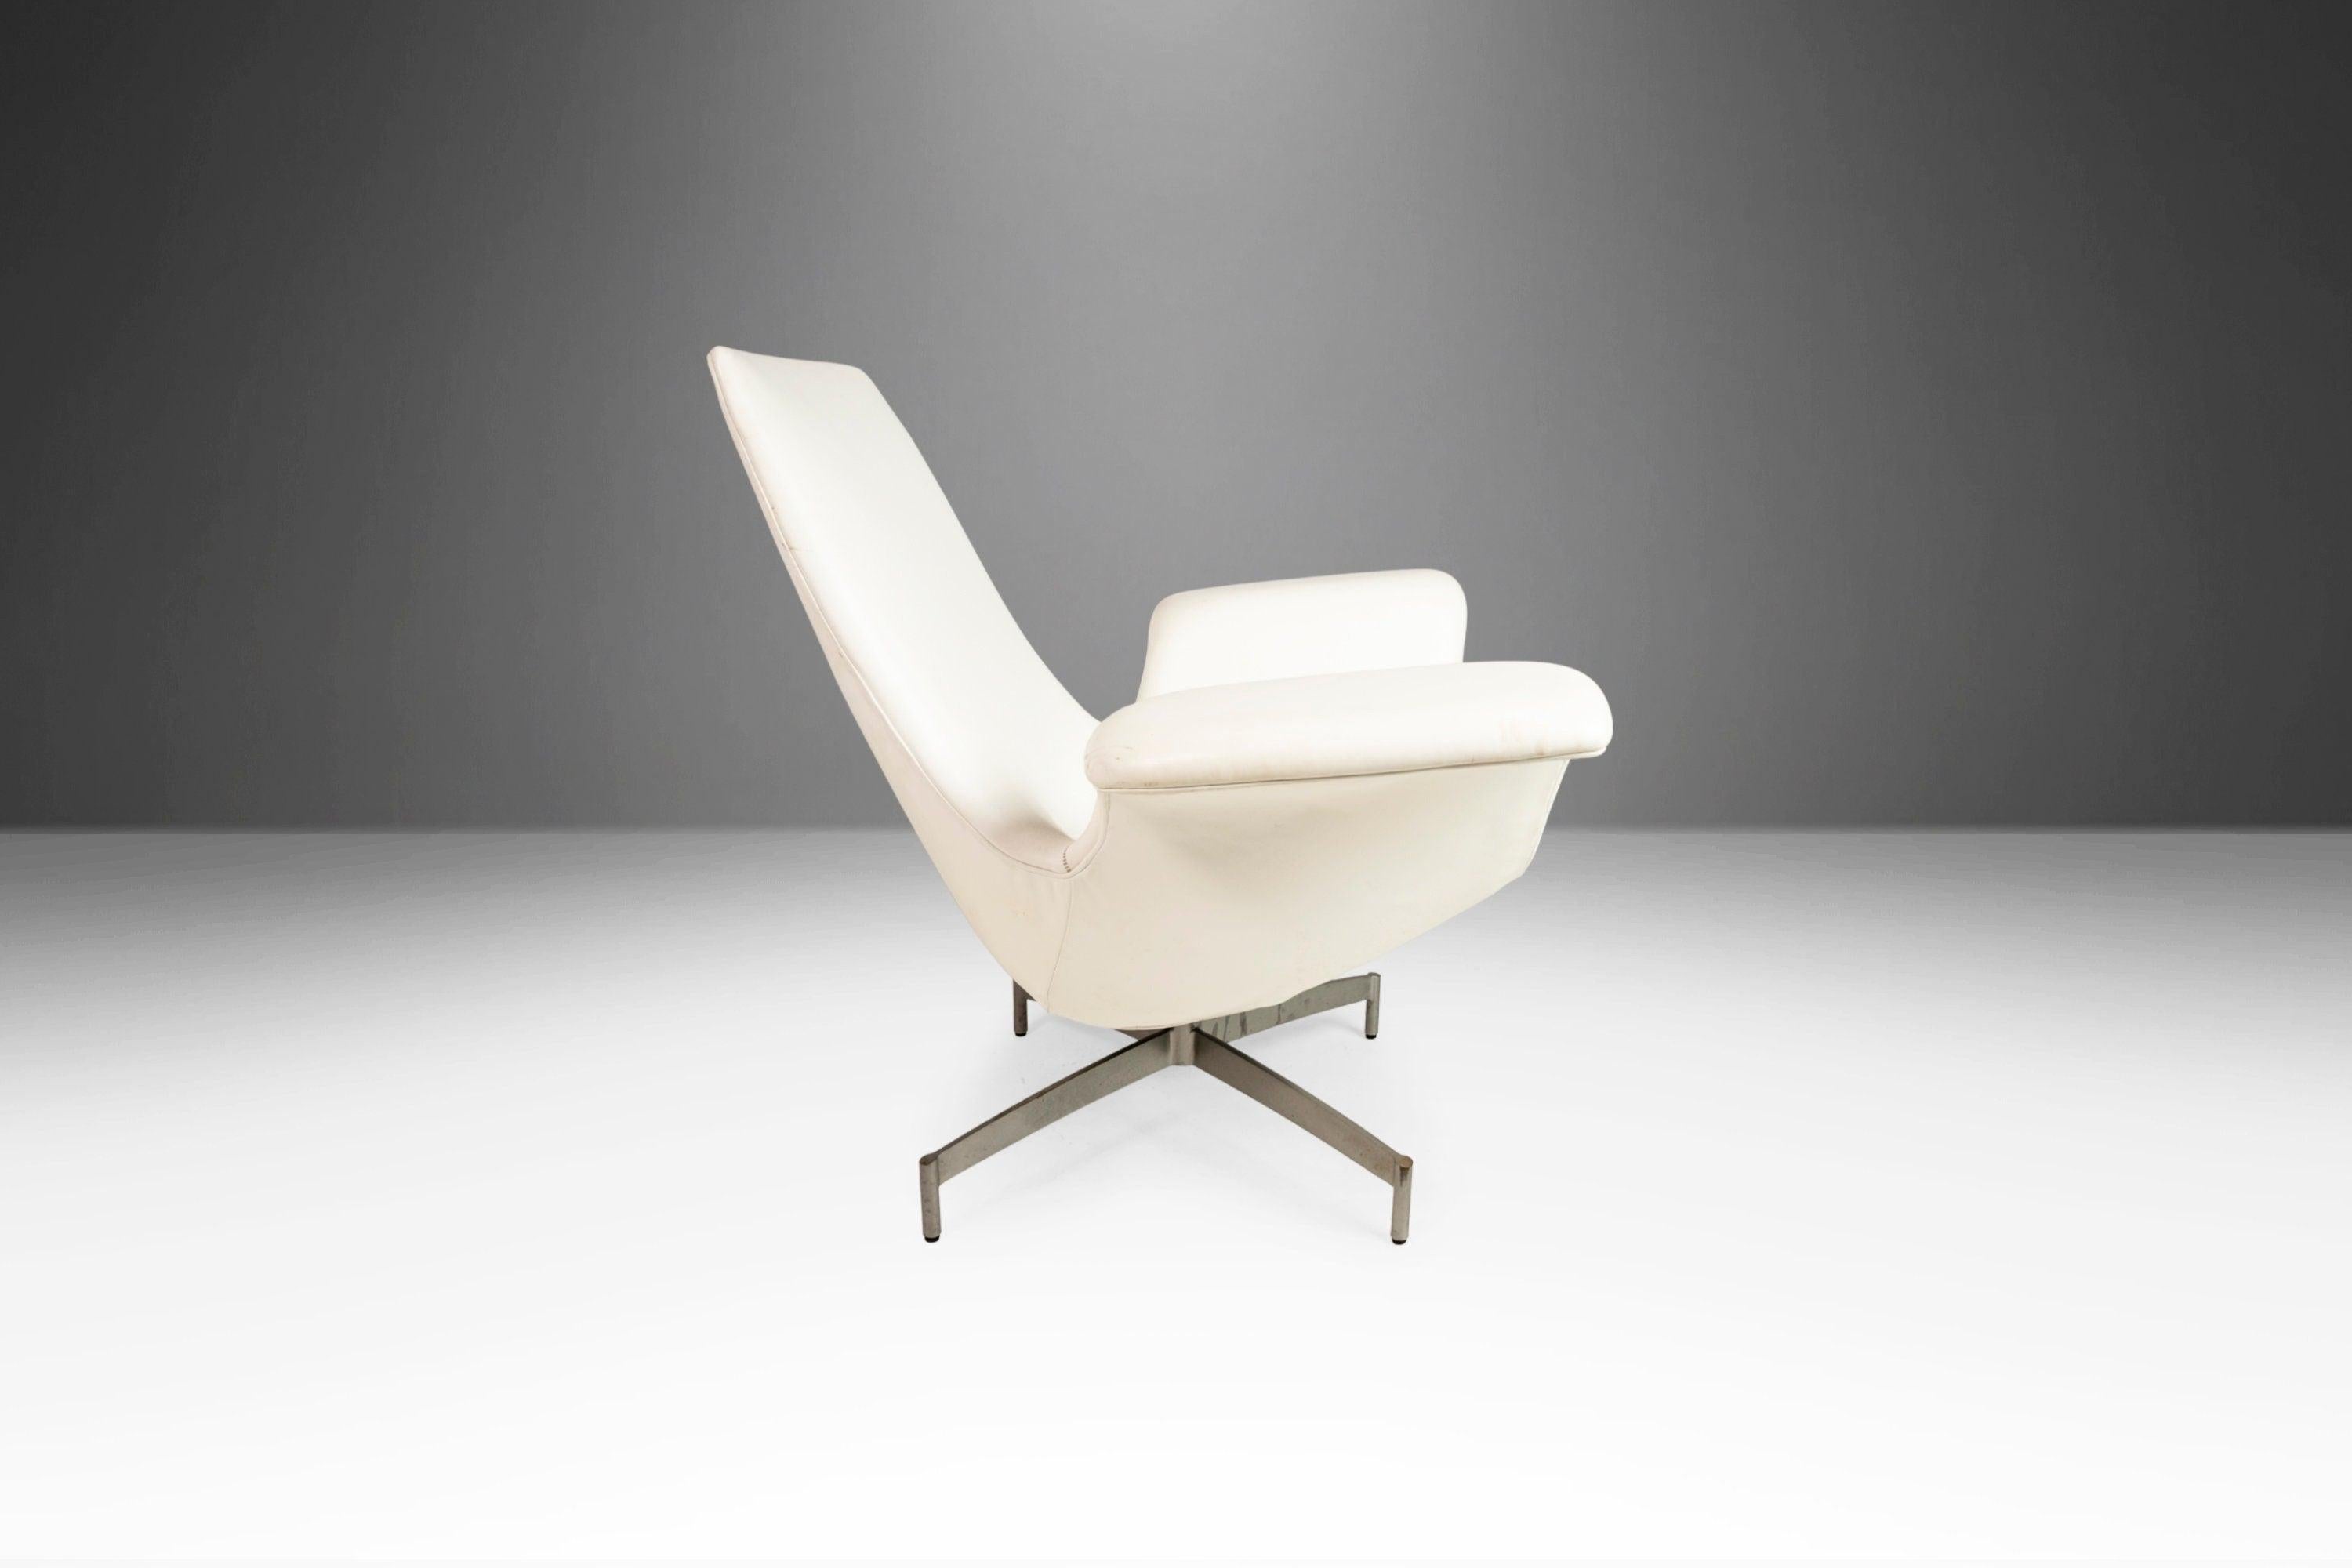 Inspired by the classic design aesthetic of mid-century modernism, the Dialogue chair provides an intuitive and purposeful solution for casual conference and lobby scenarios. Simple yet functional, the lounge chair features an integral task surface